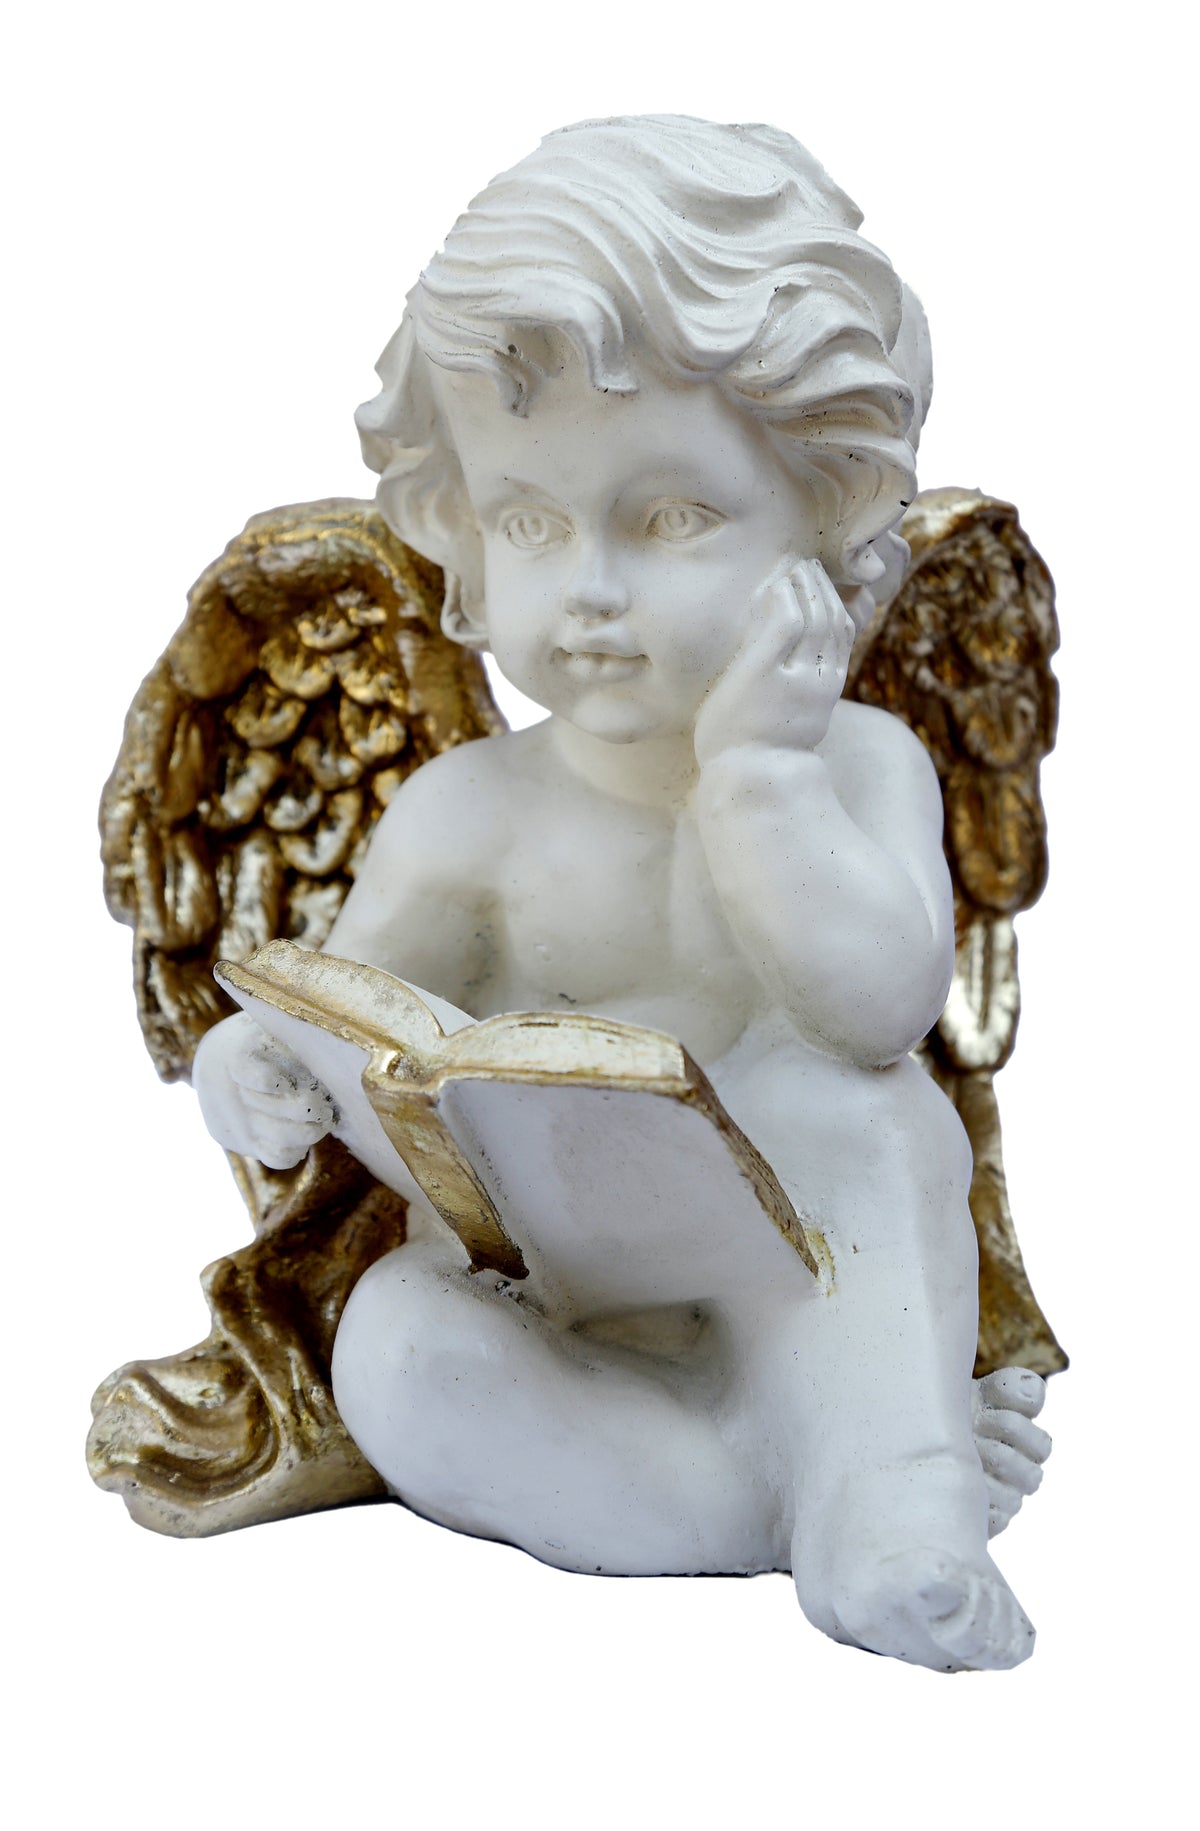 The Lucky Angel showpiece for desk